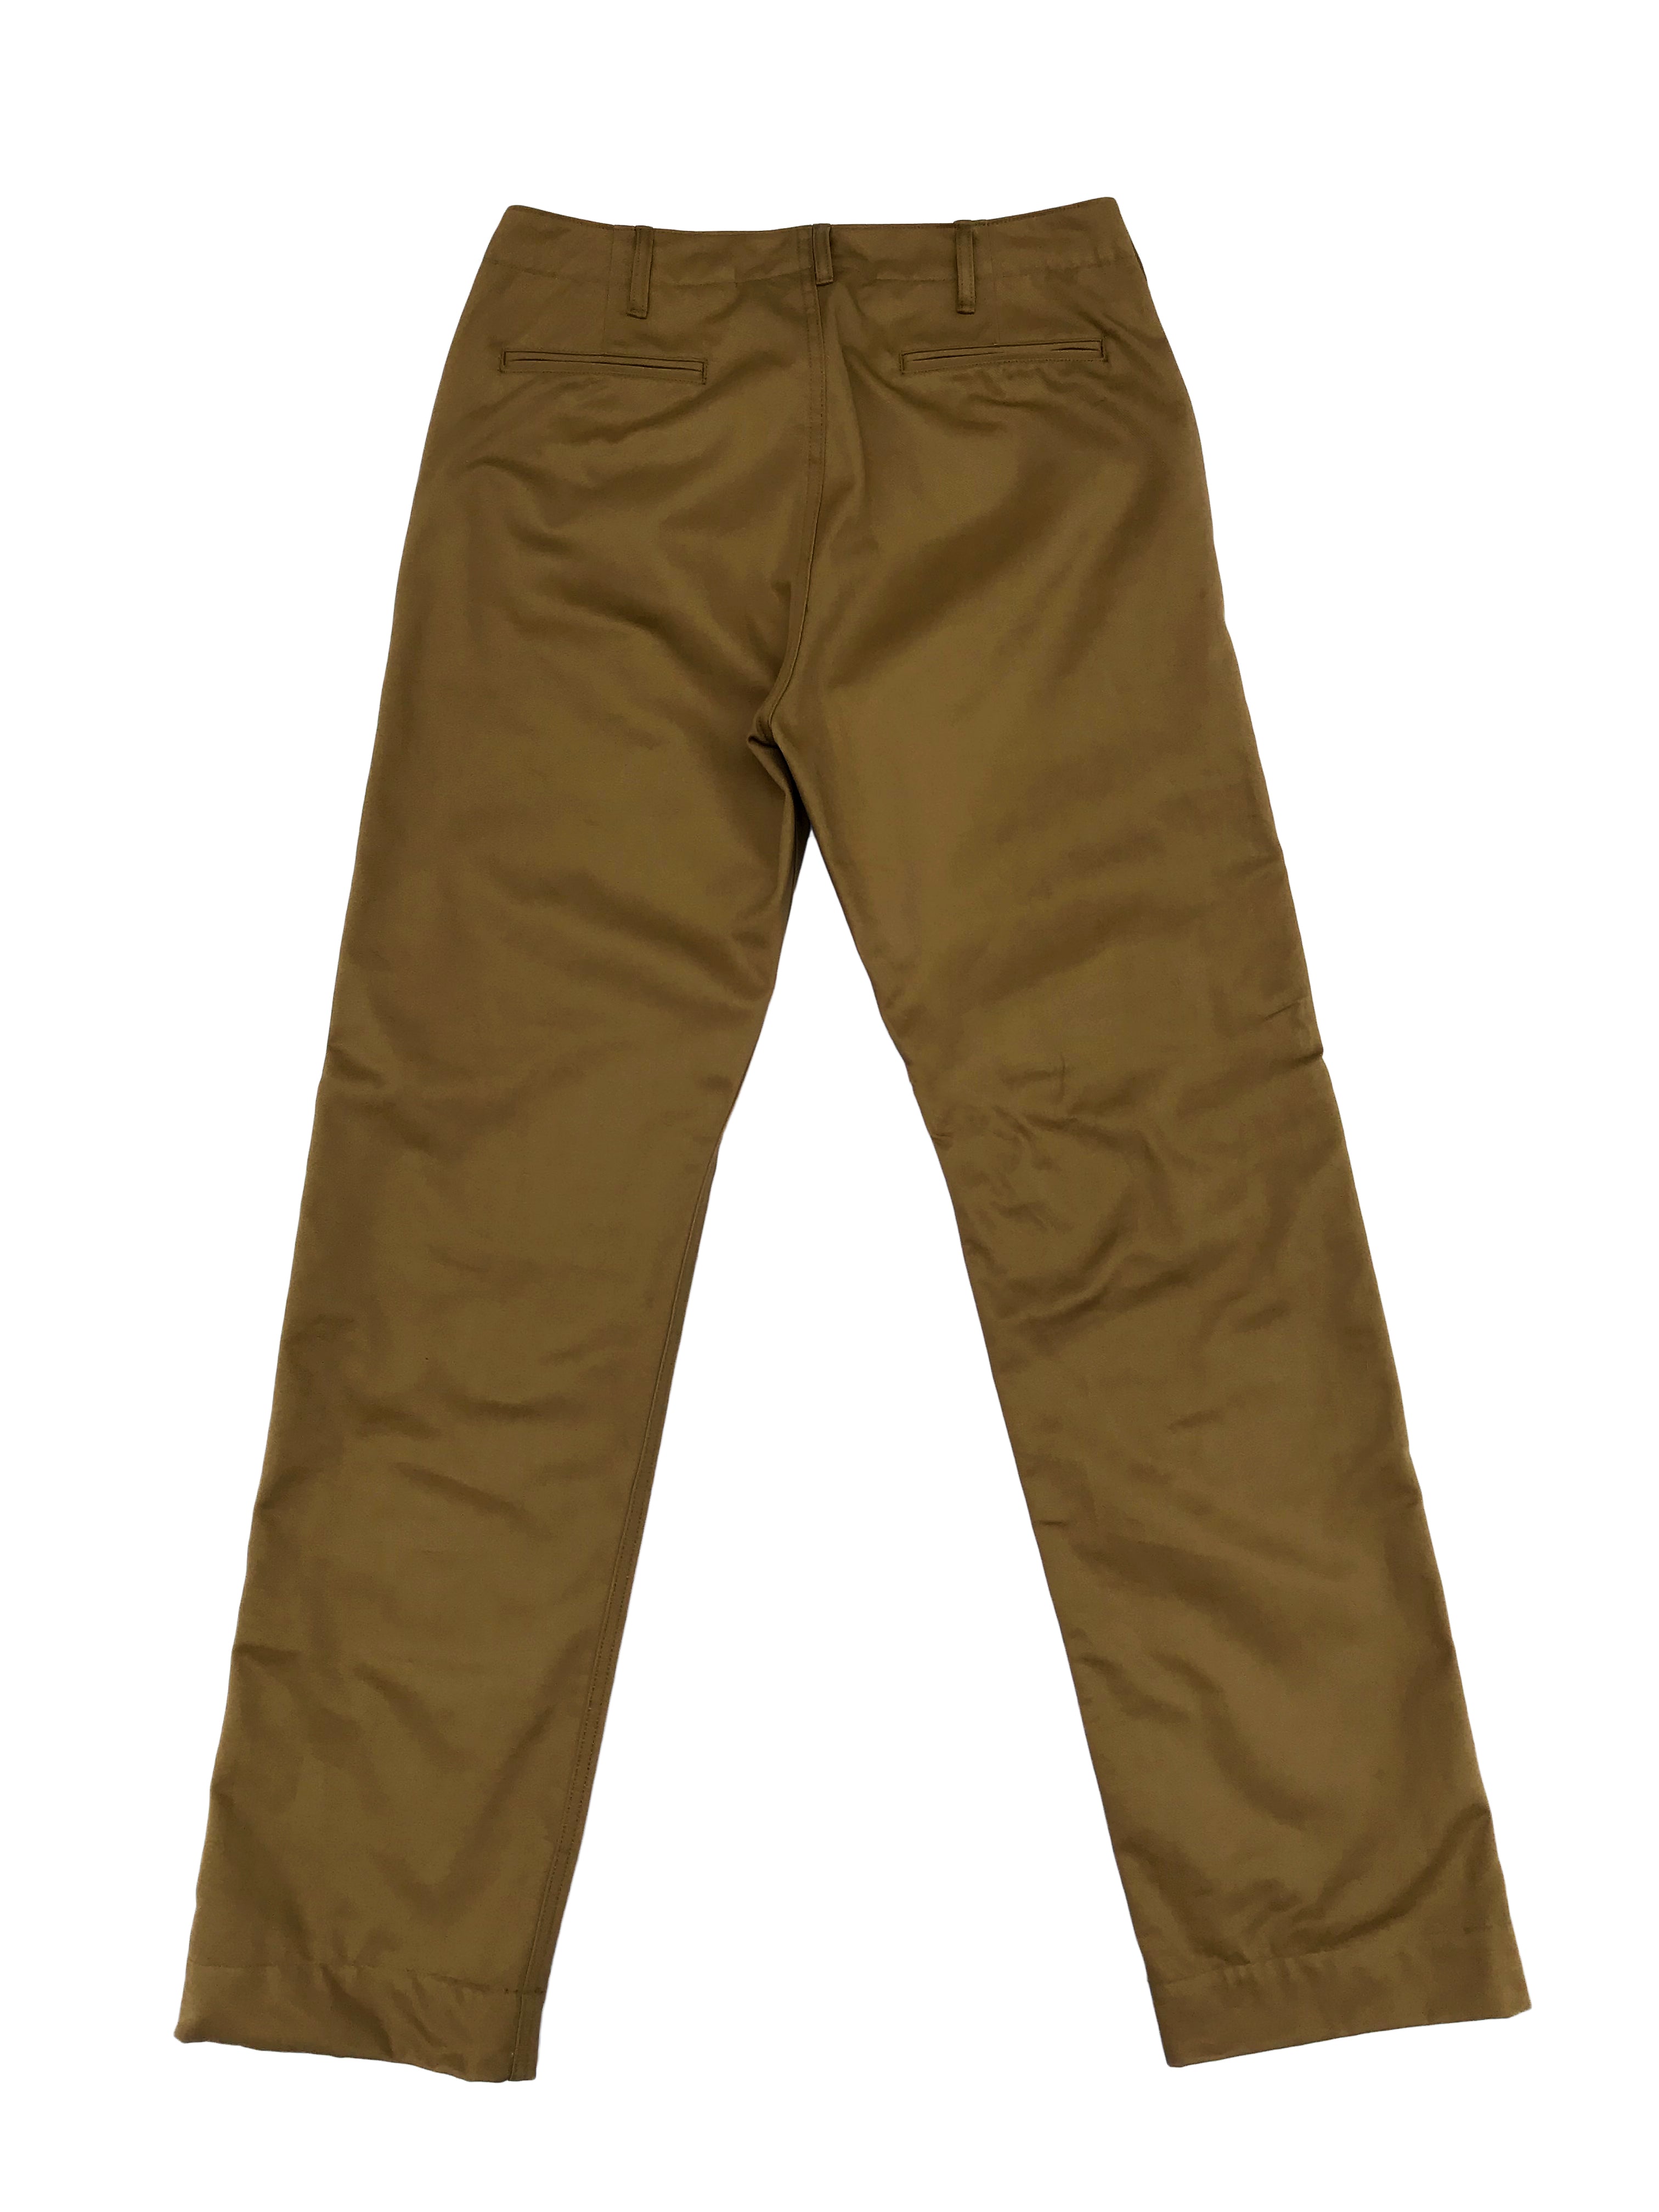 LD Vintage Army Trousers in Khaki Twill